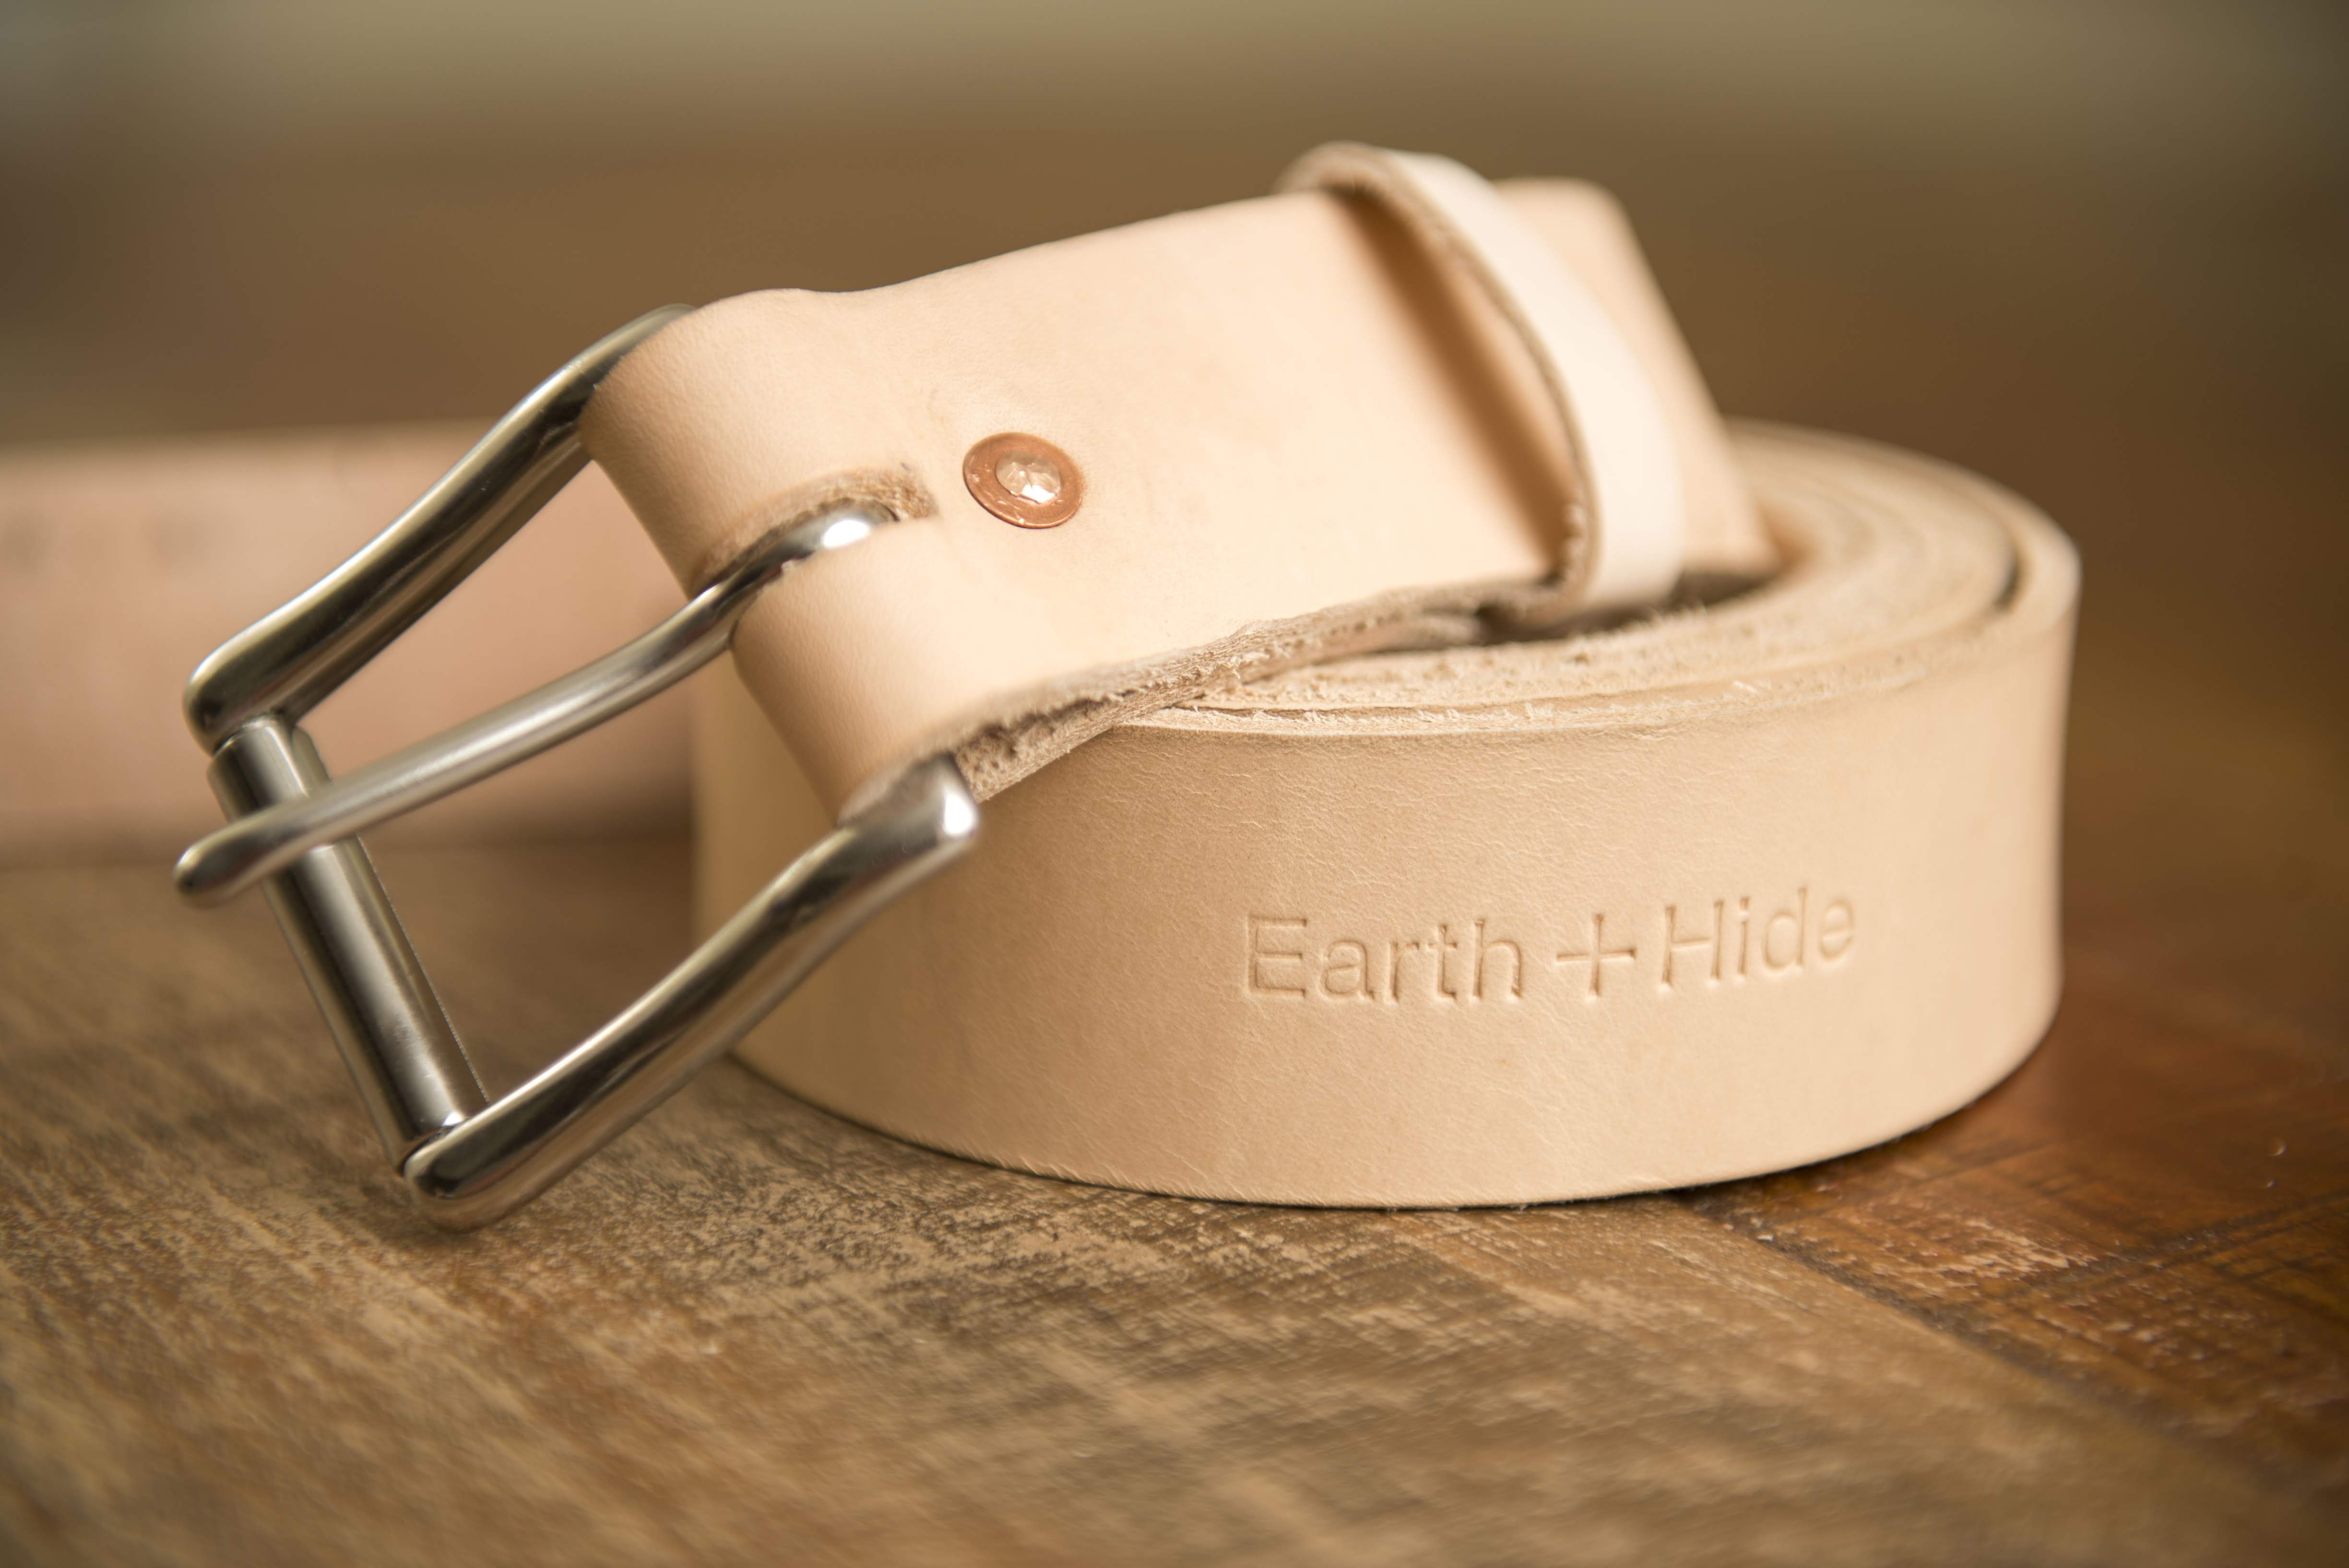 The Raw Leather Belt Brave Star Selvage, 58% OFF